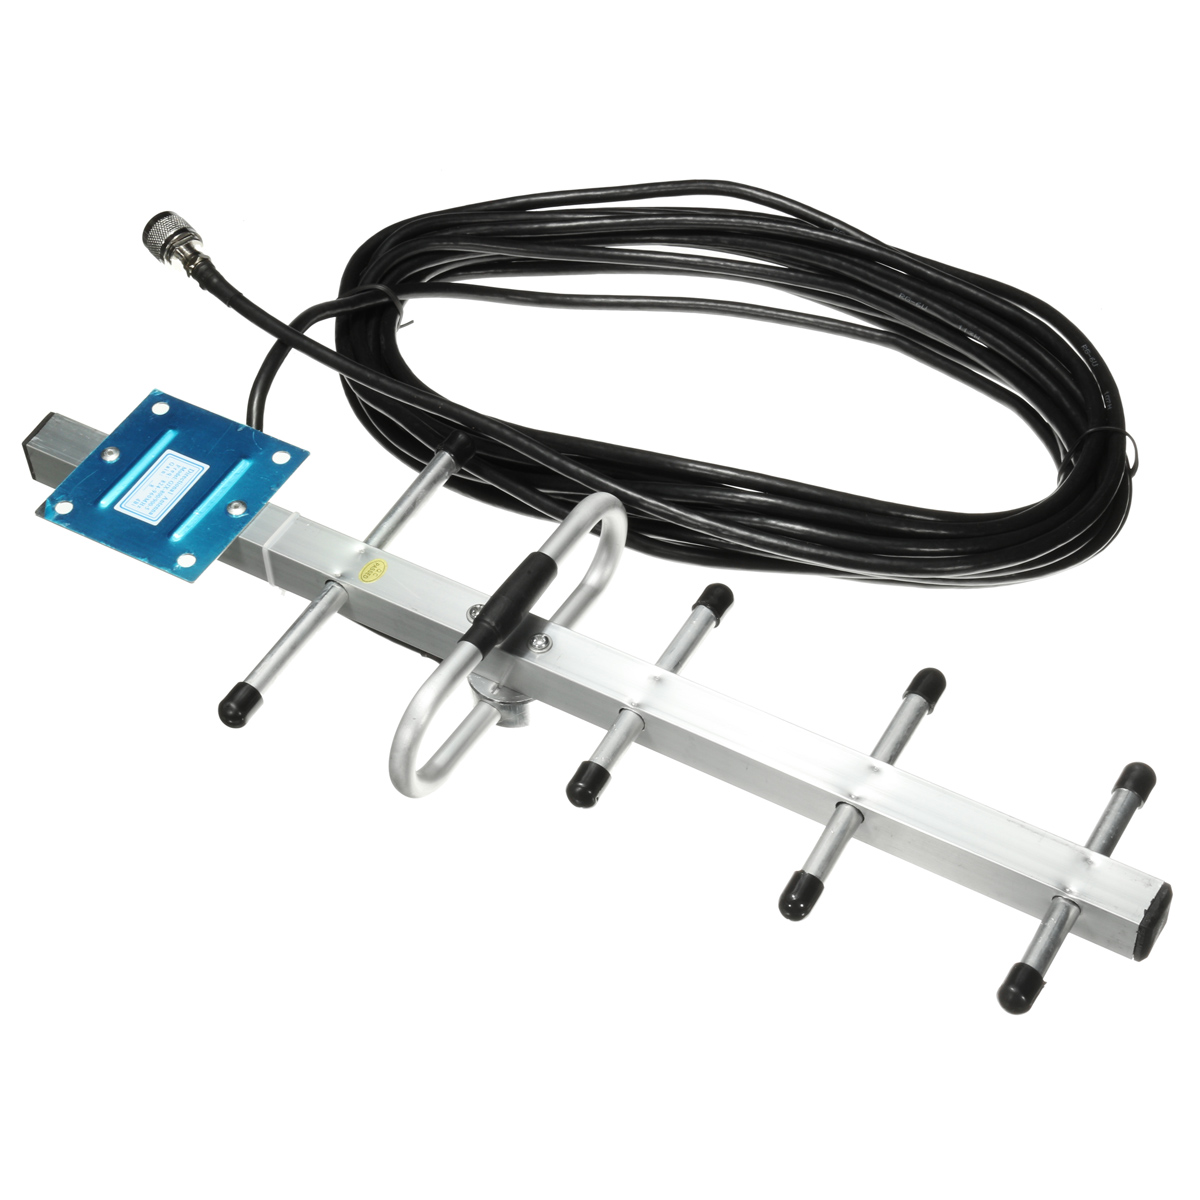 110-240V-LCD-GSM-900Mhz-Cell-Phone-Signal-Repeater-Booster-AmplifierYagi-Antenna-Kit-1092498-3